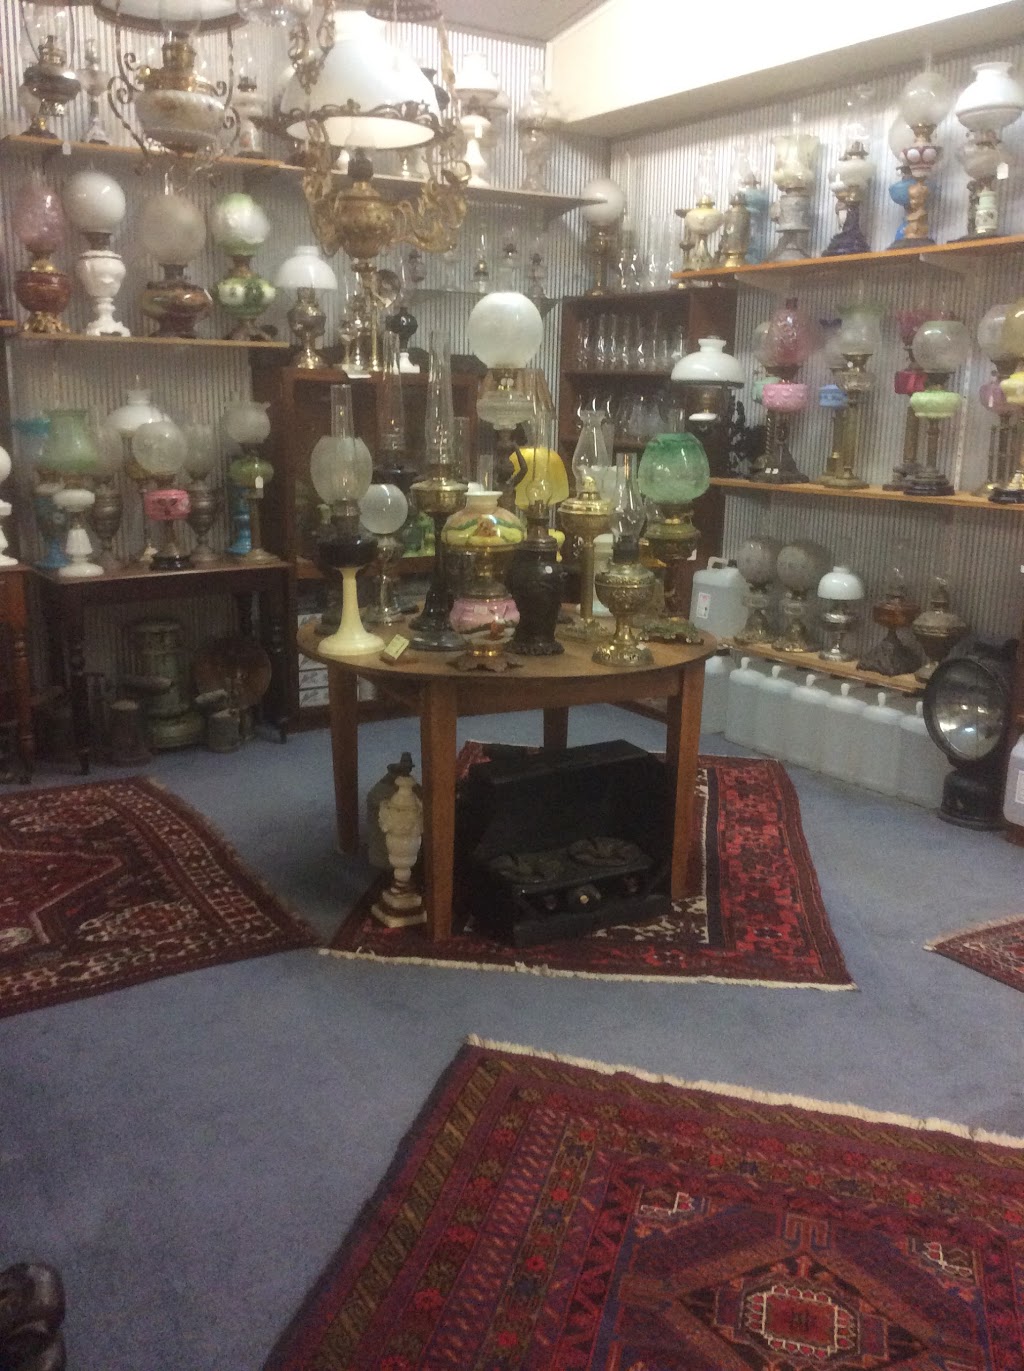 Lake Bathurst Cottage Collectables | home goods store | 84A Duncan St, Braidwood NSW 2622, Australia | 0408483255 OR +61 408 483 255